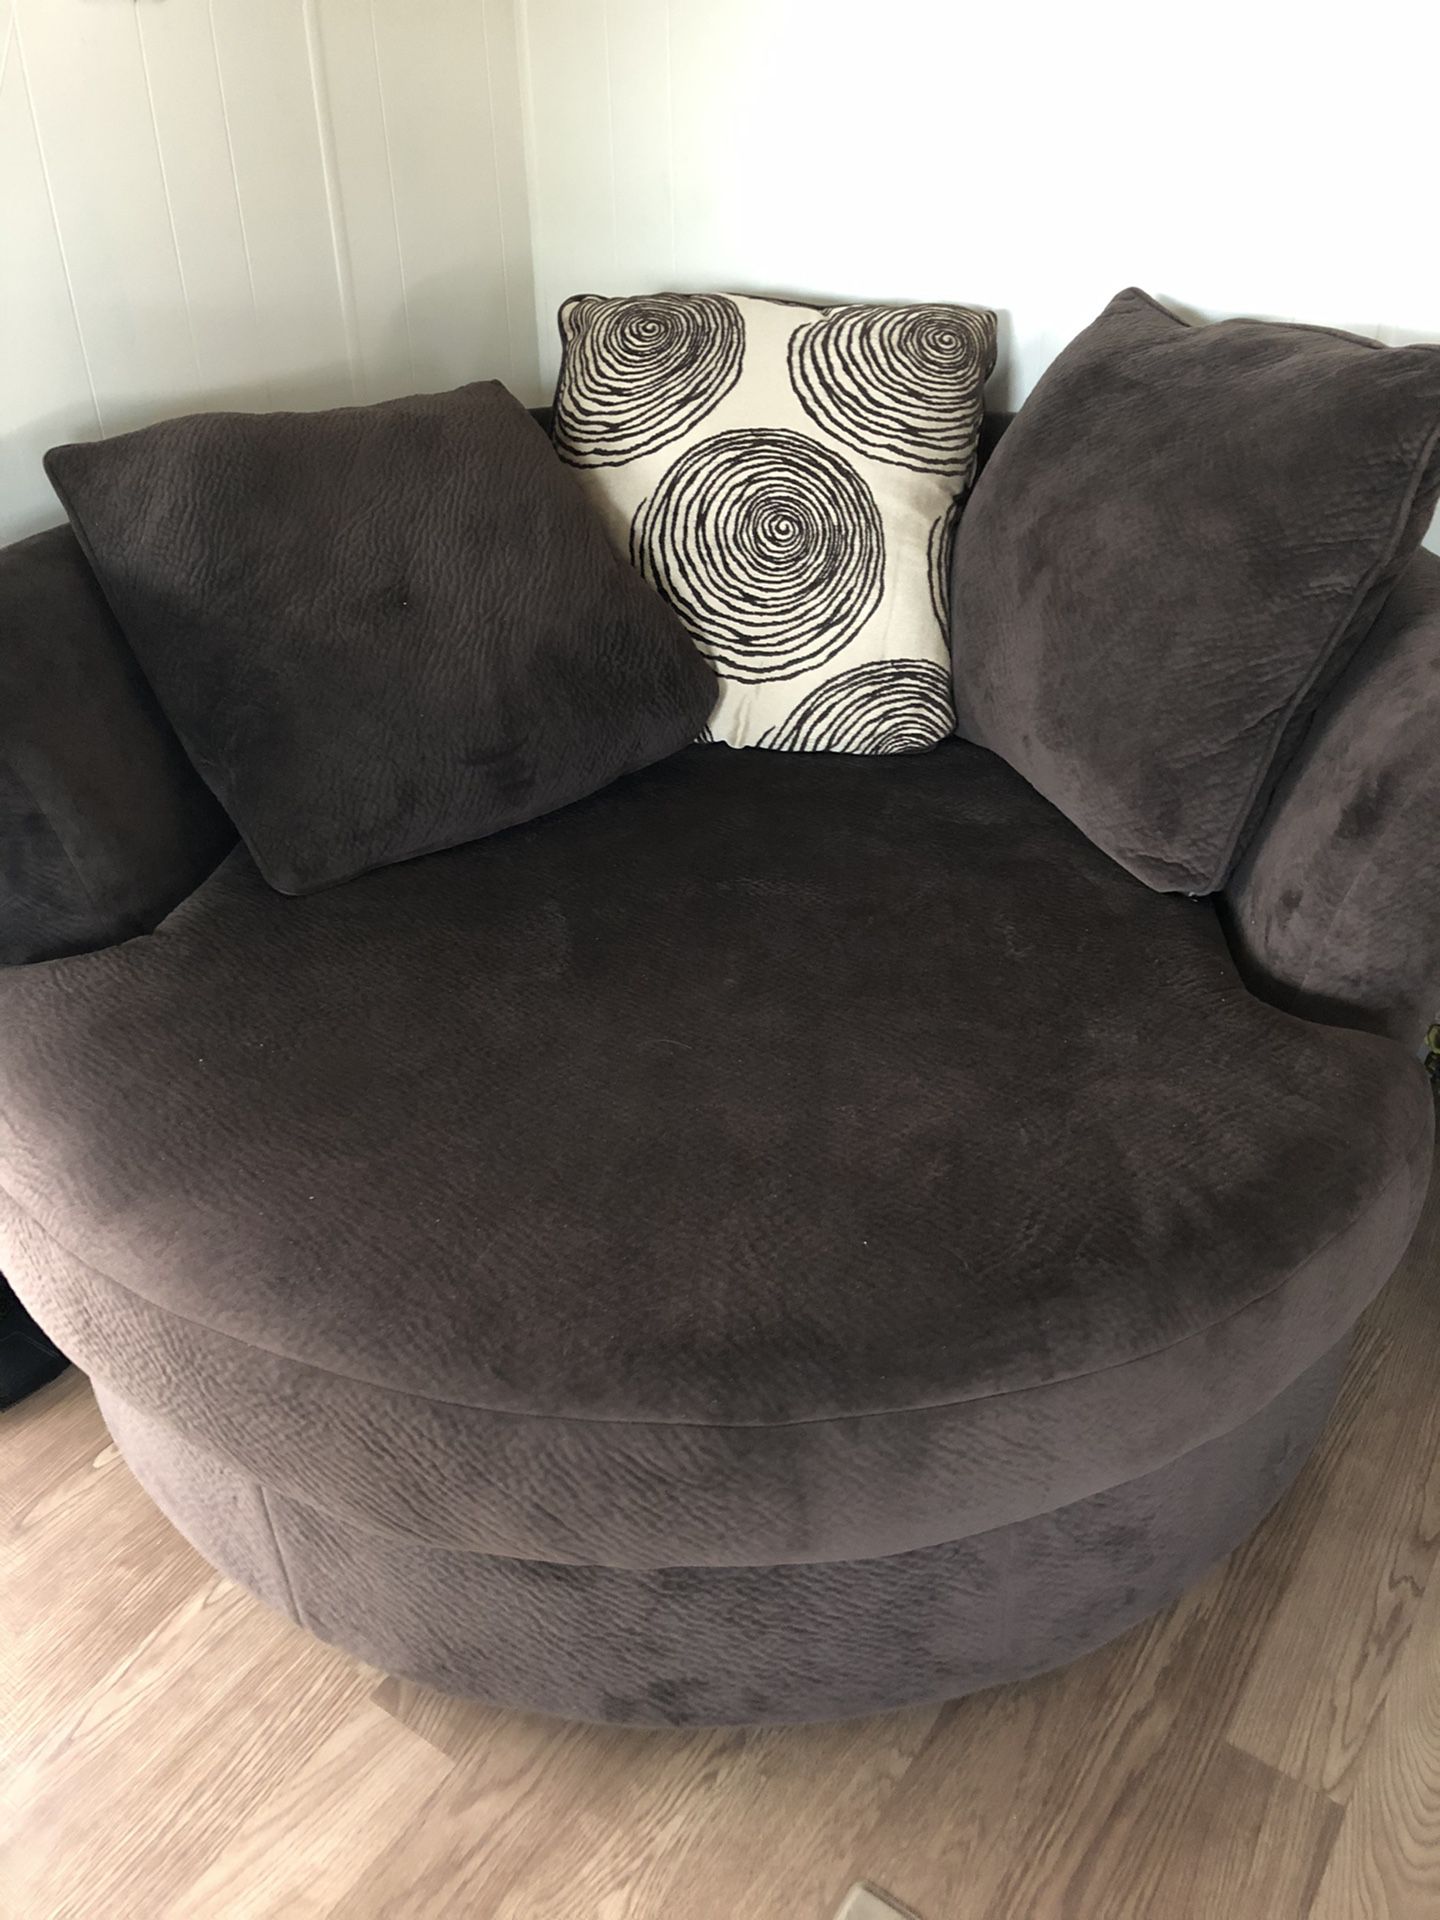 Large round chair